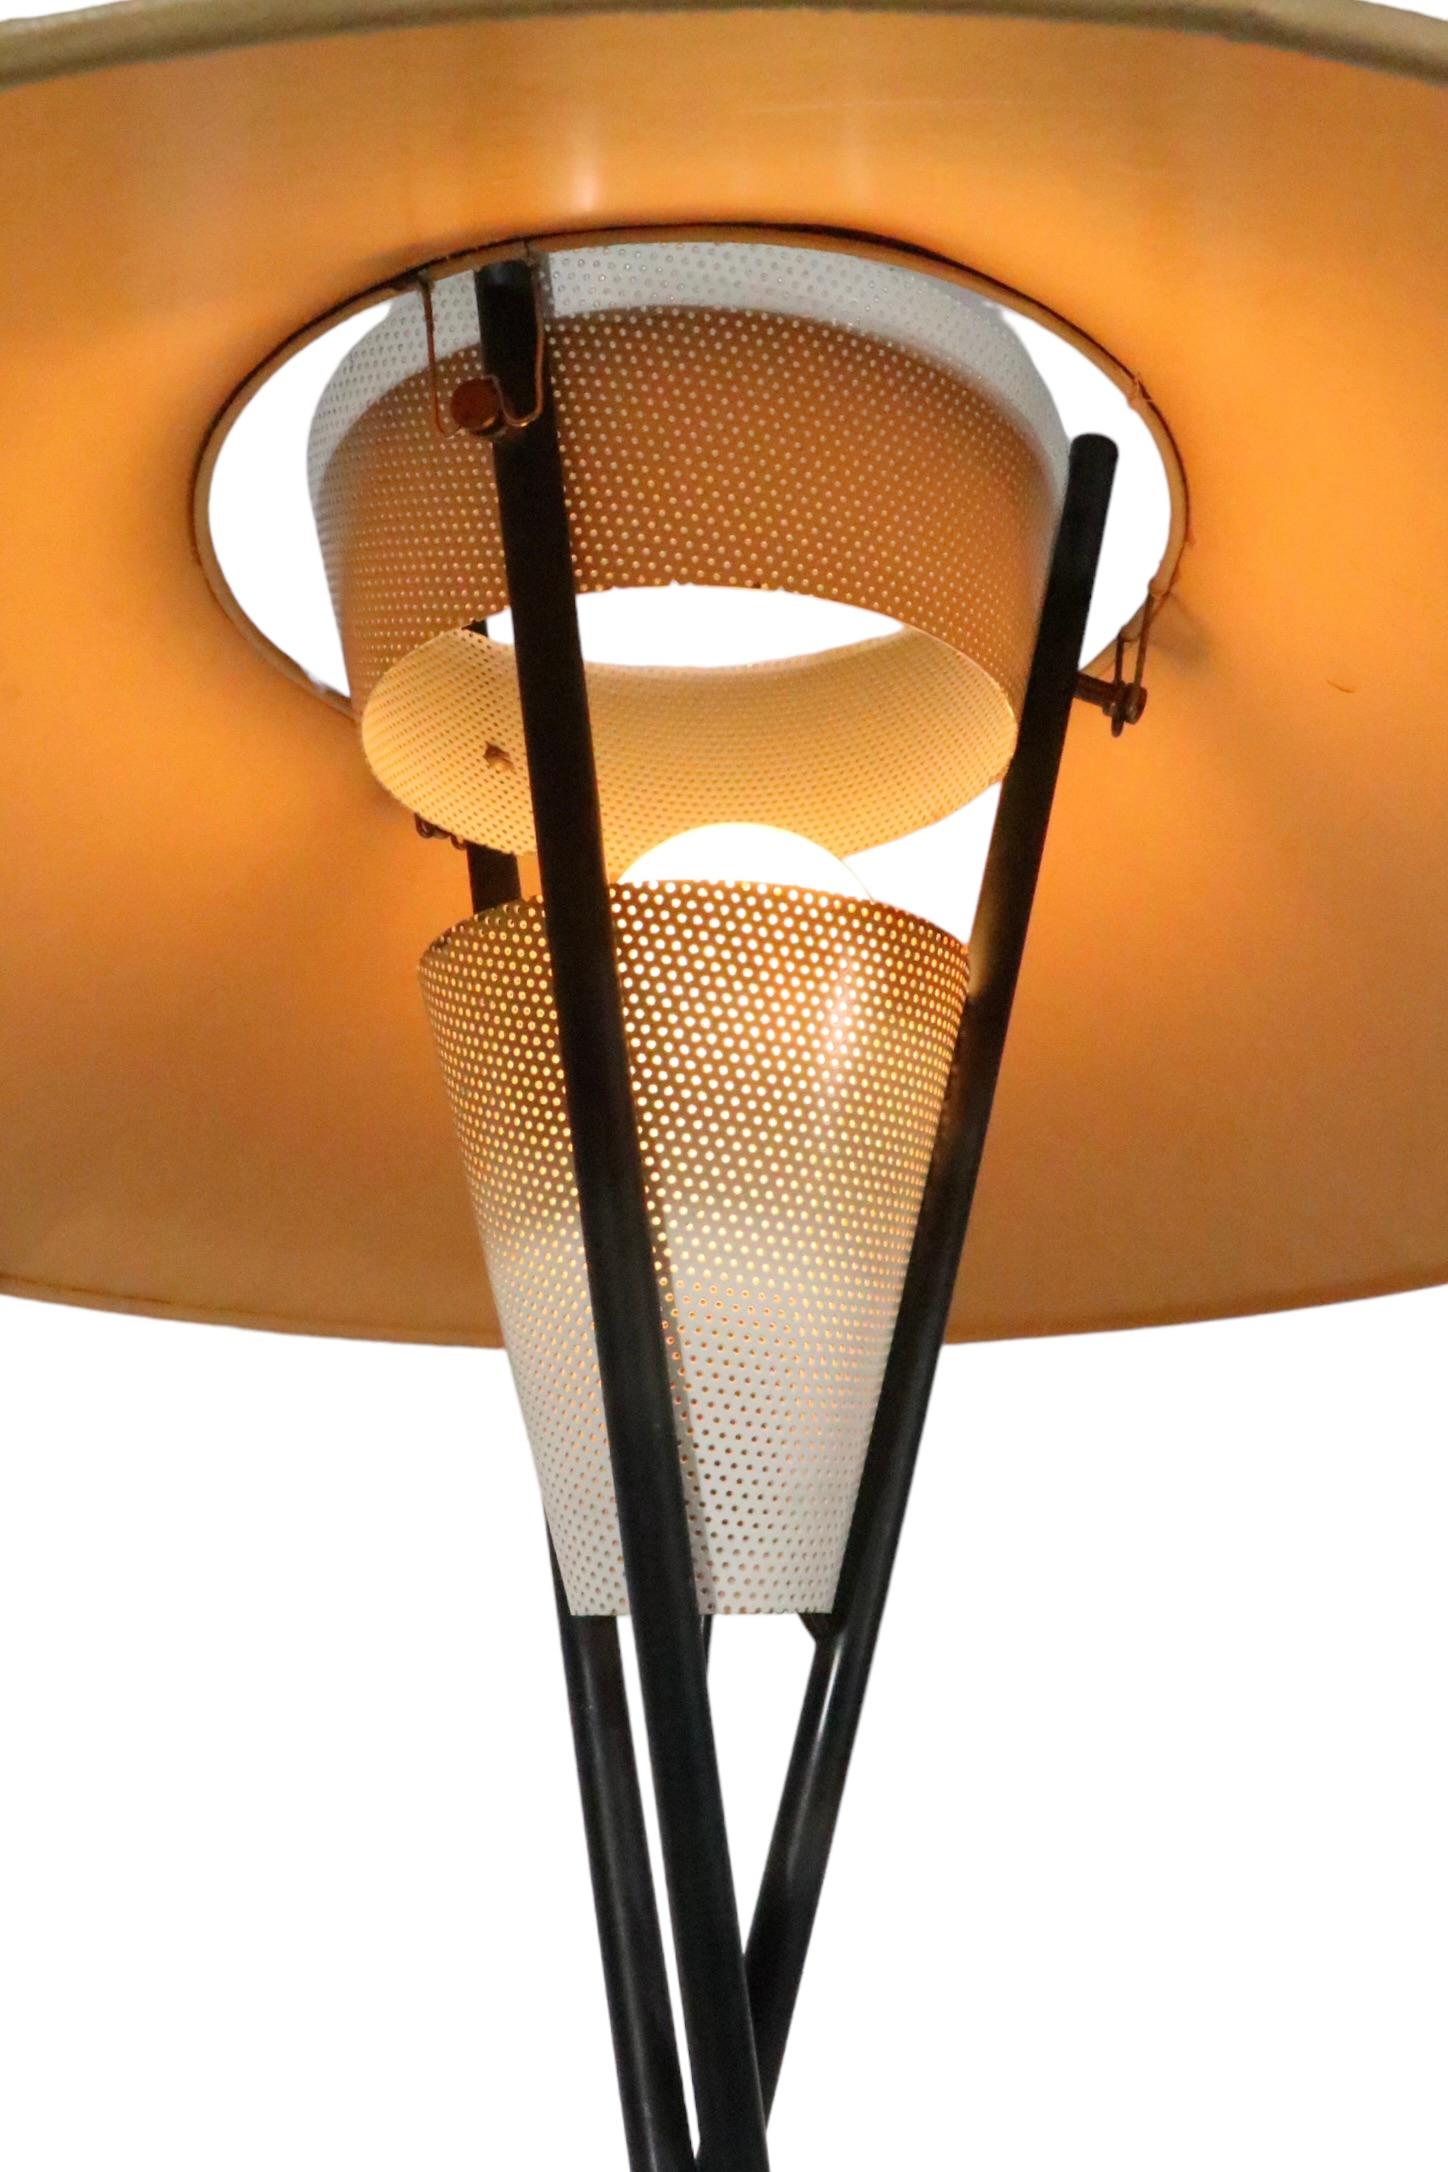 Midcentury Tri Pod Table Lamp by Gerald Thurston for Lightolier C 1950s For Sale 4